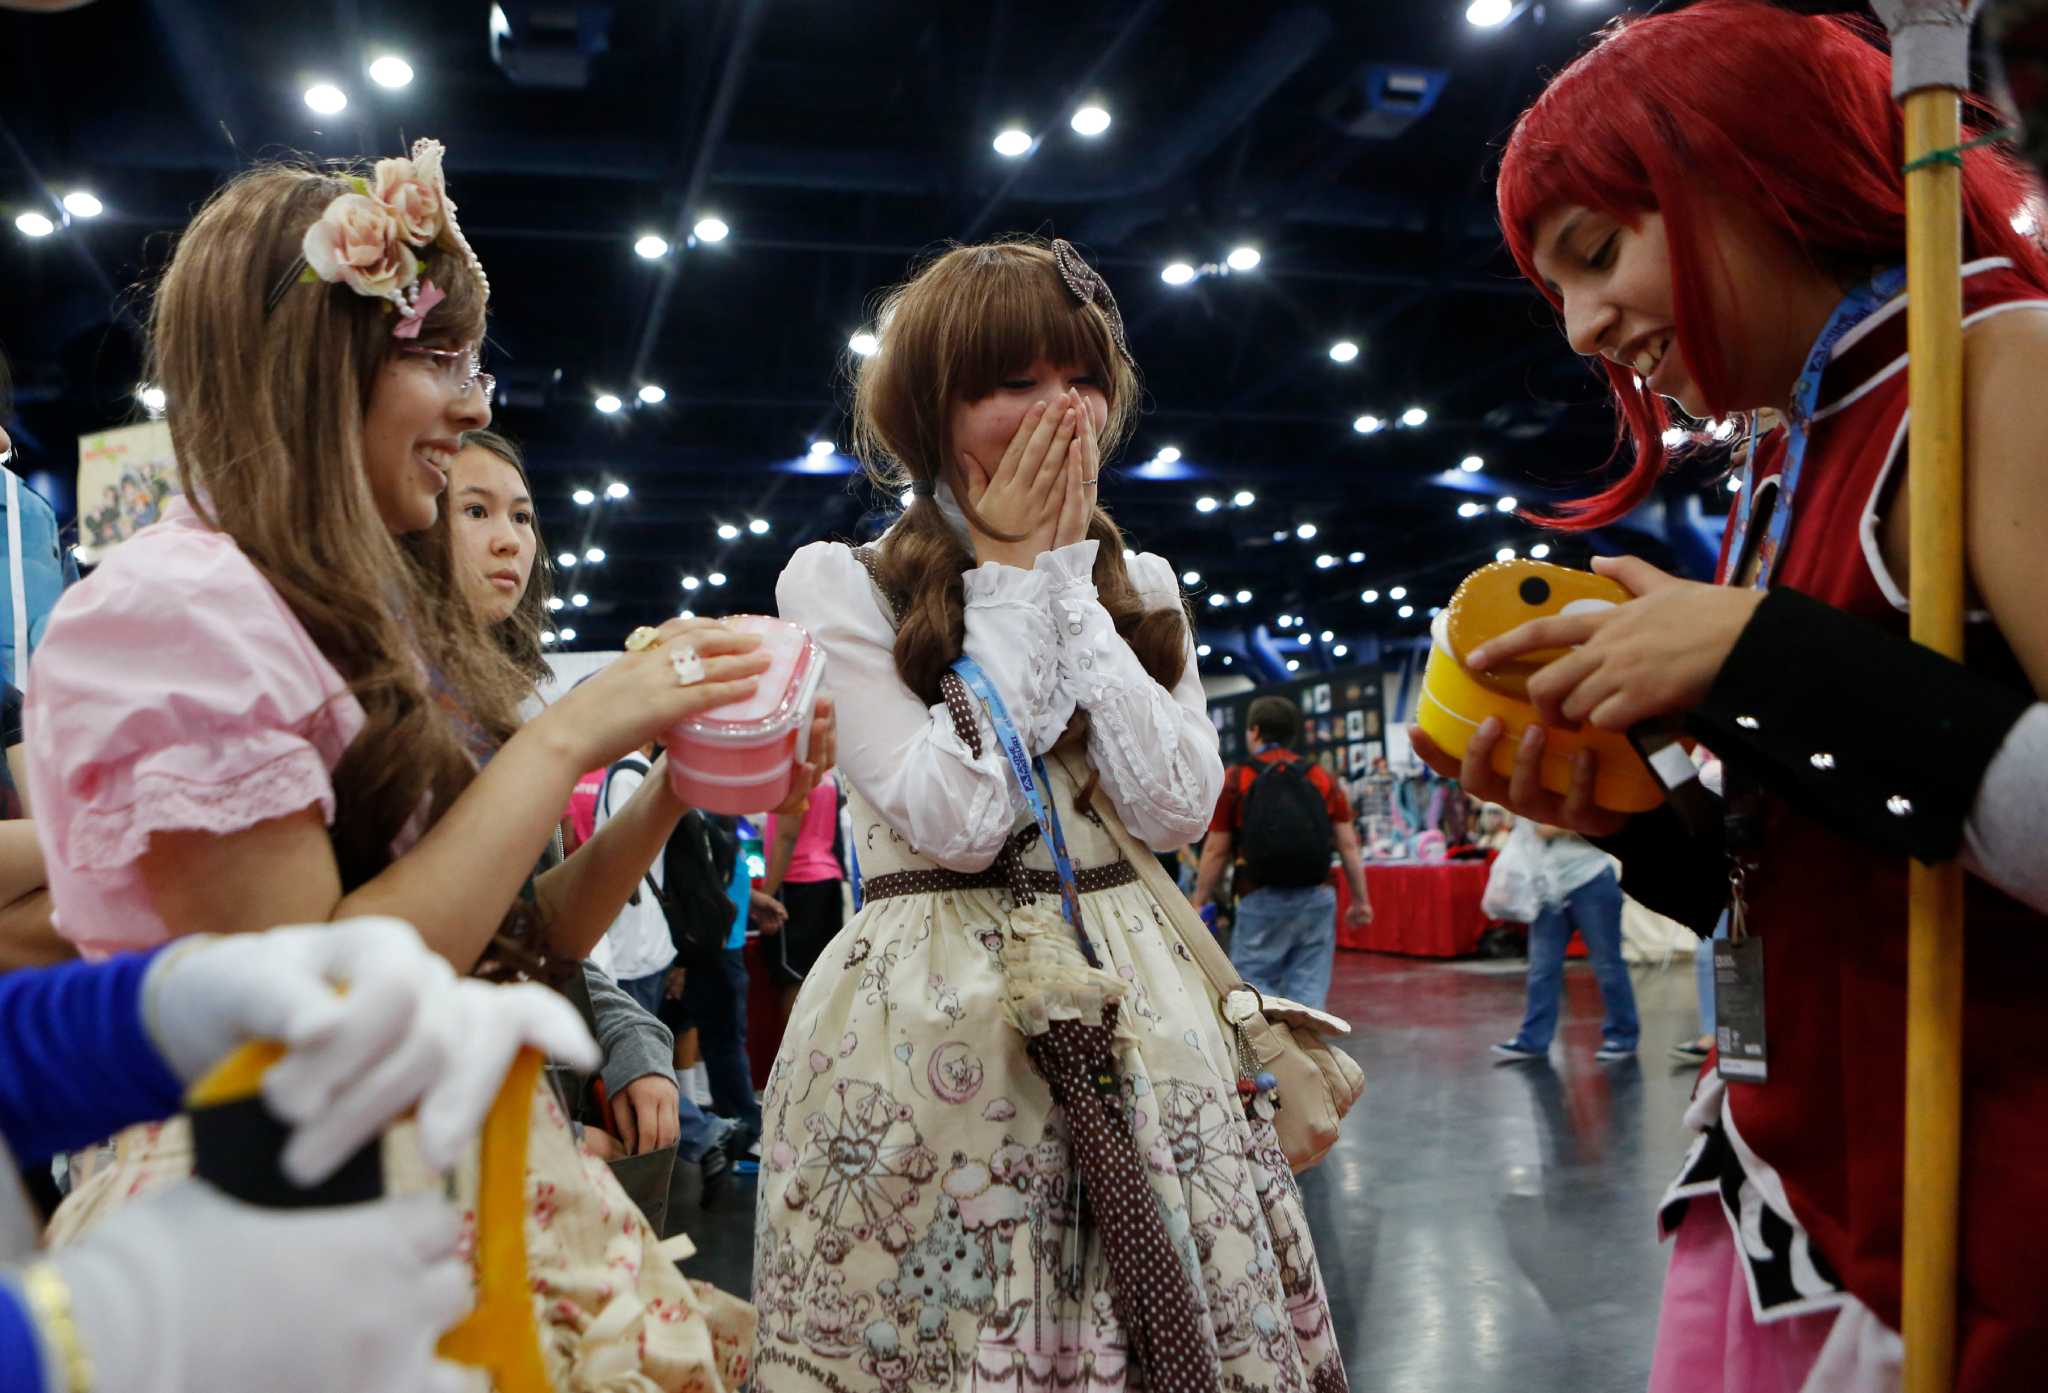 Popular anime convention draws thousands